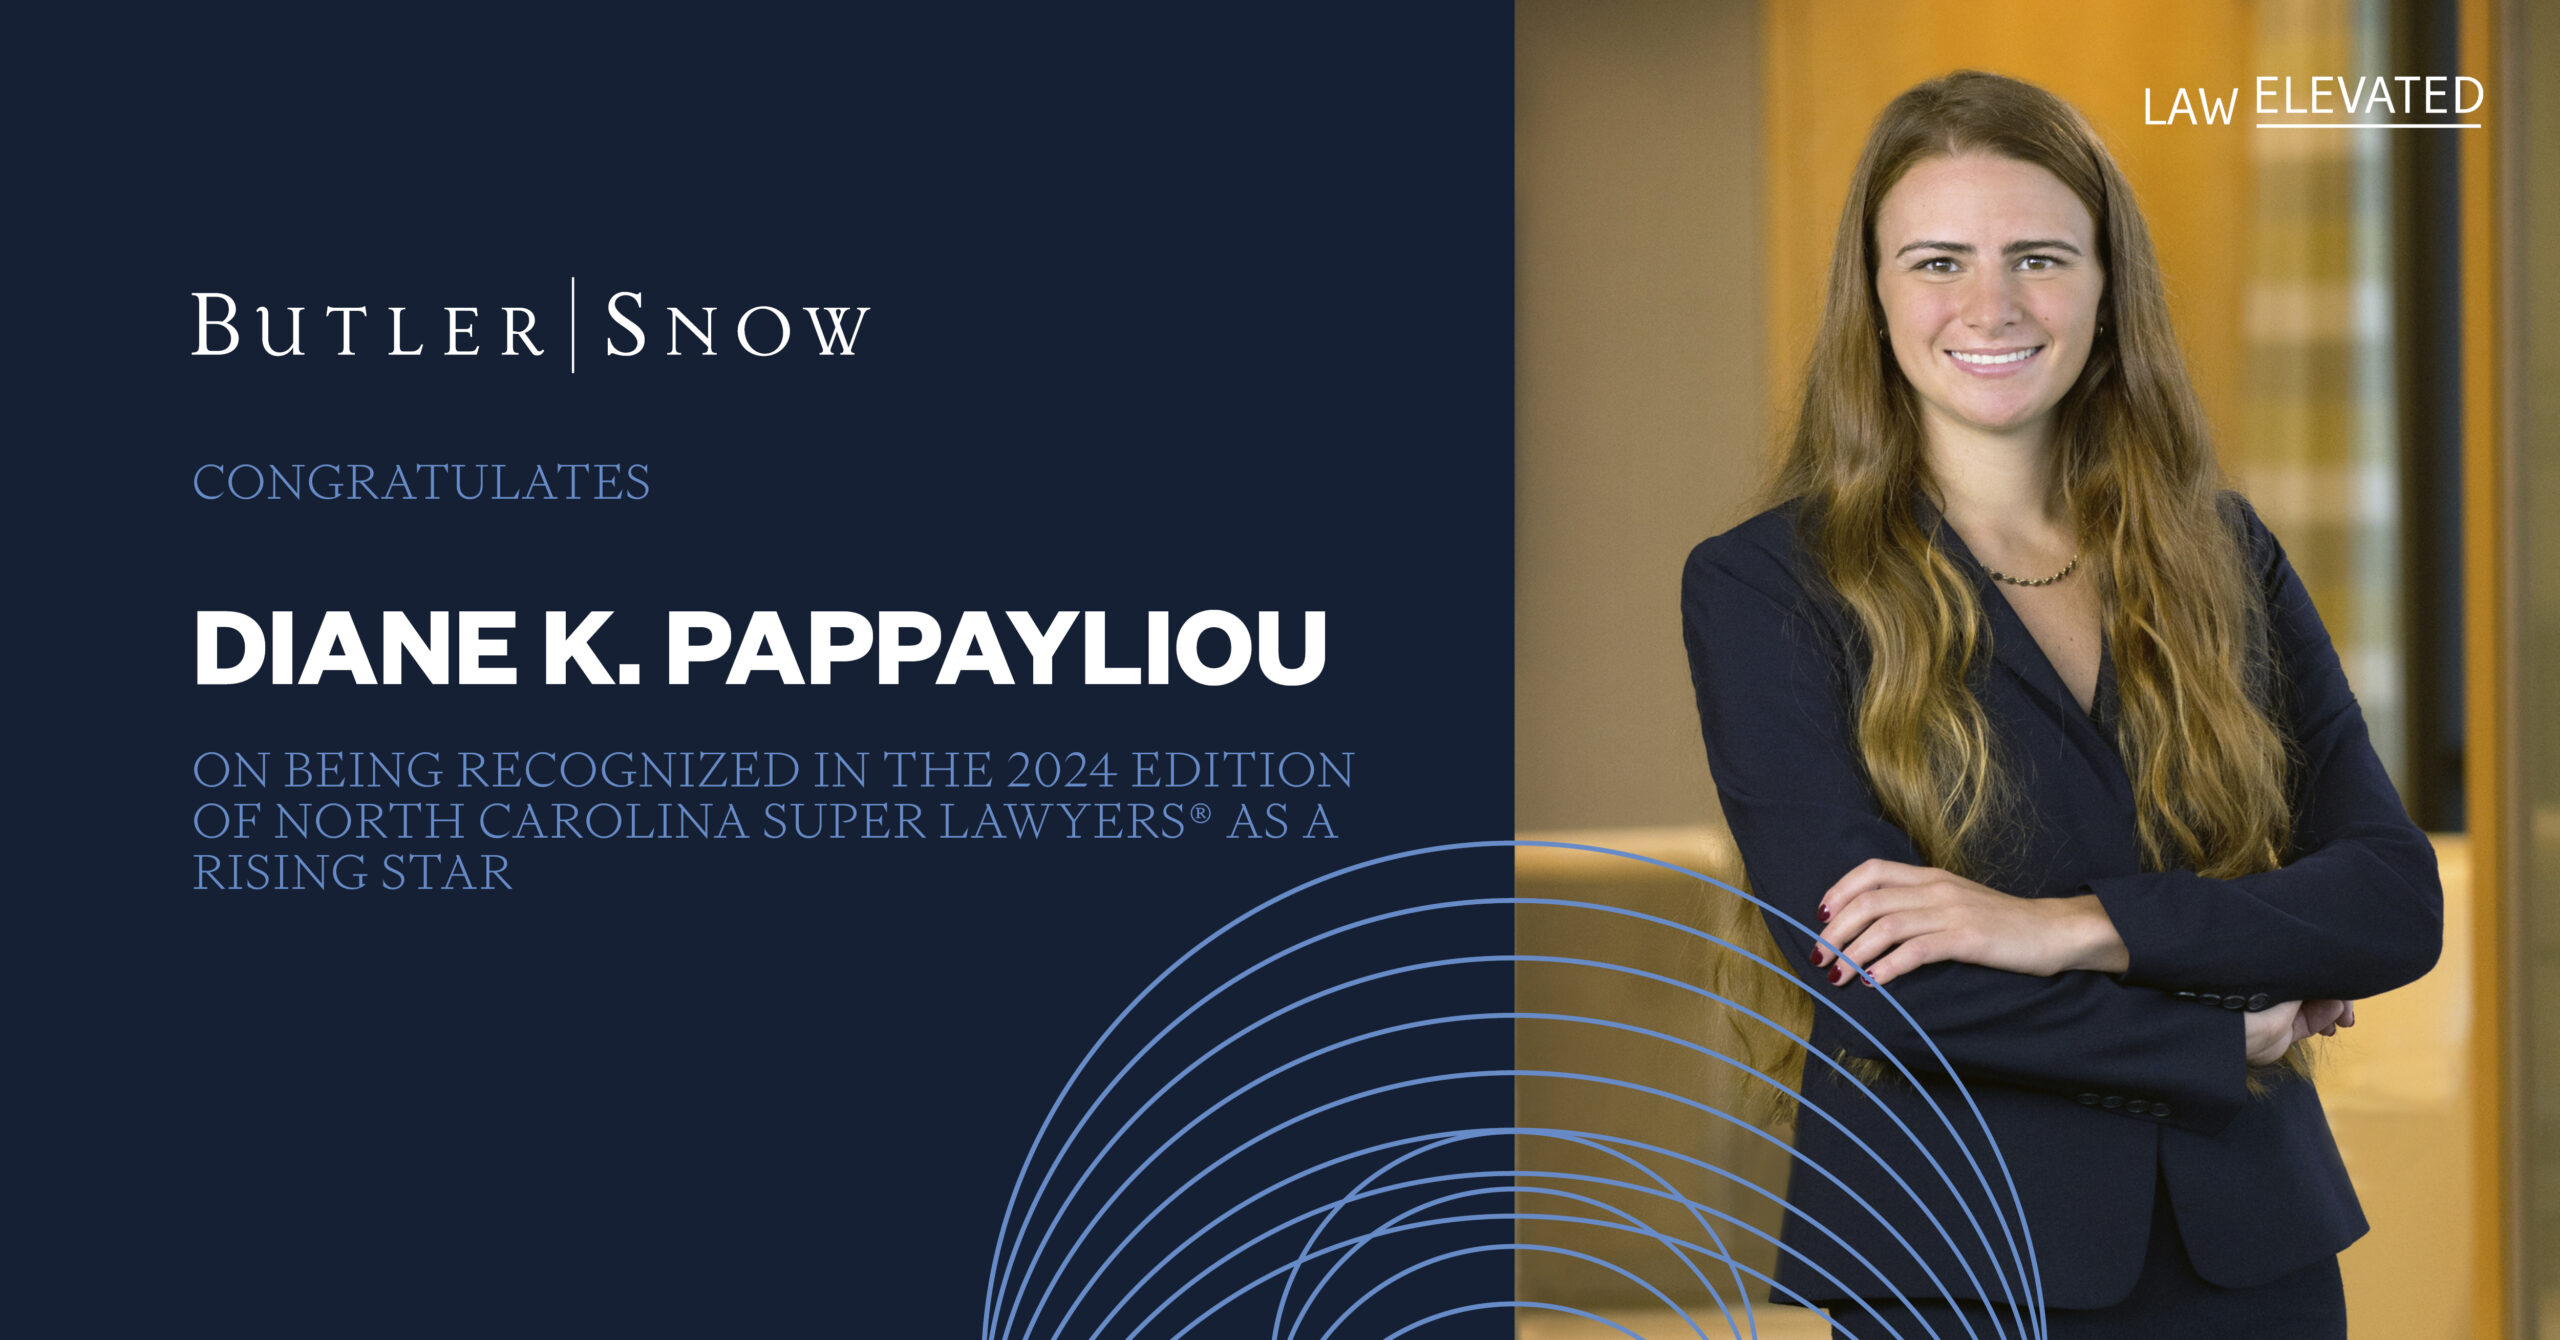 Butler Snow Attorney Diane K. Pappayliou Named 2024 Rising Star by North Carolina Super Lawyers®